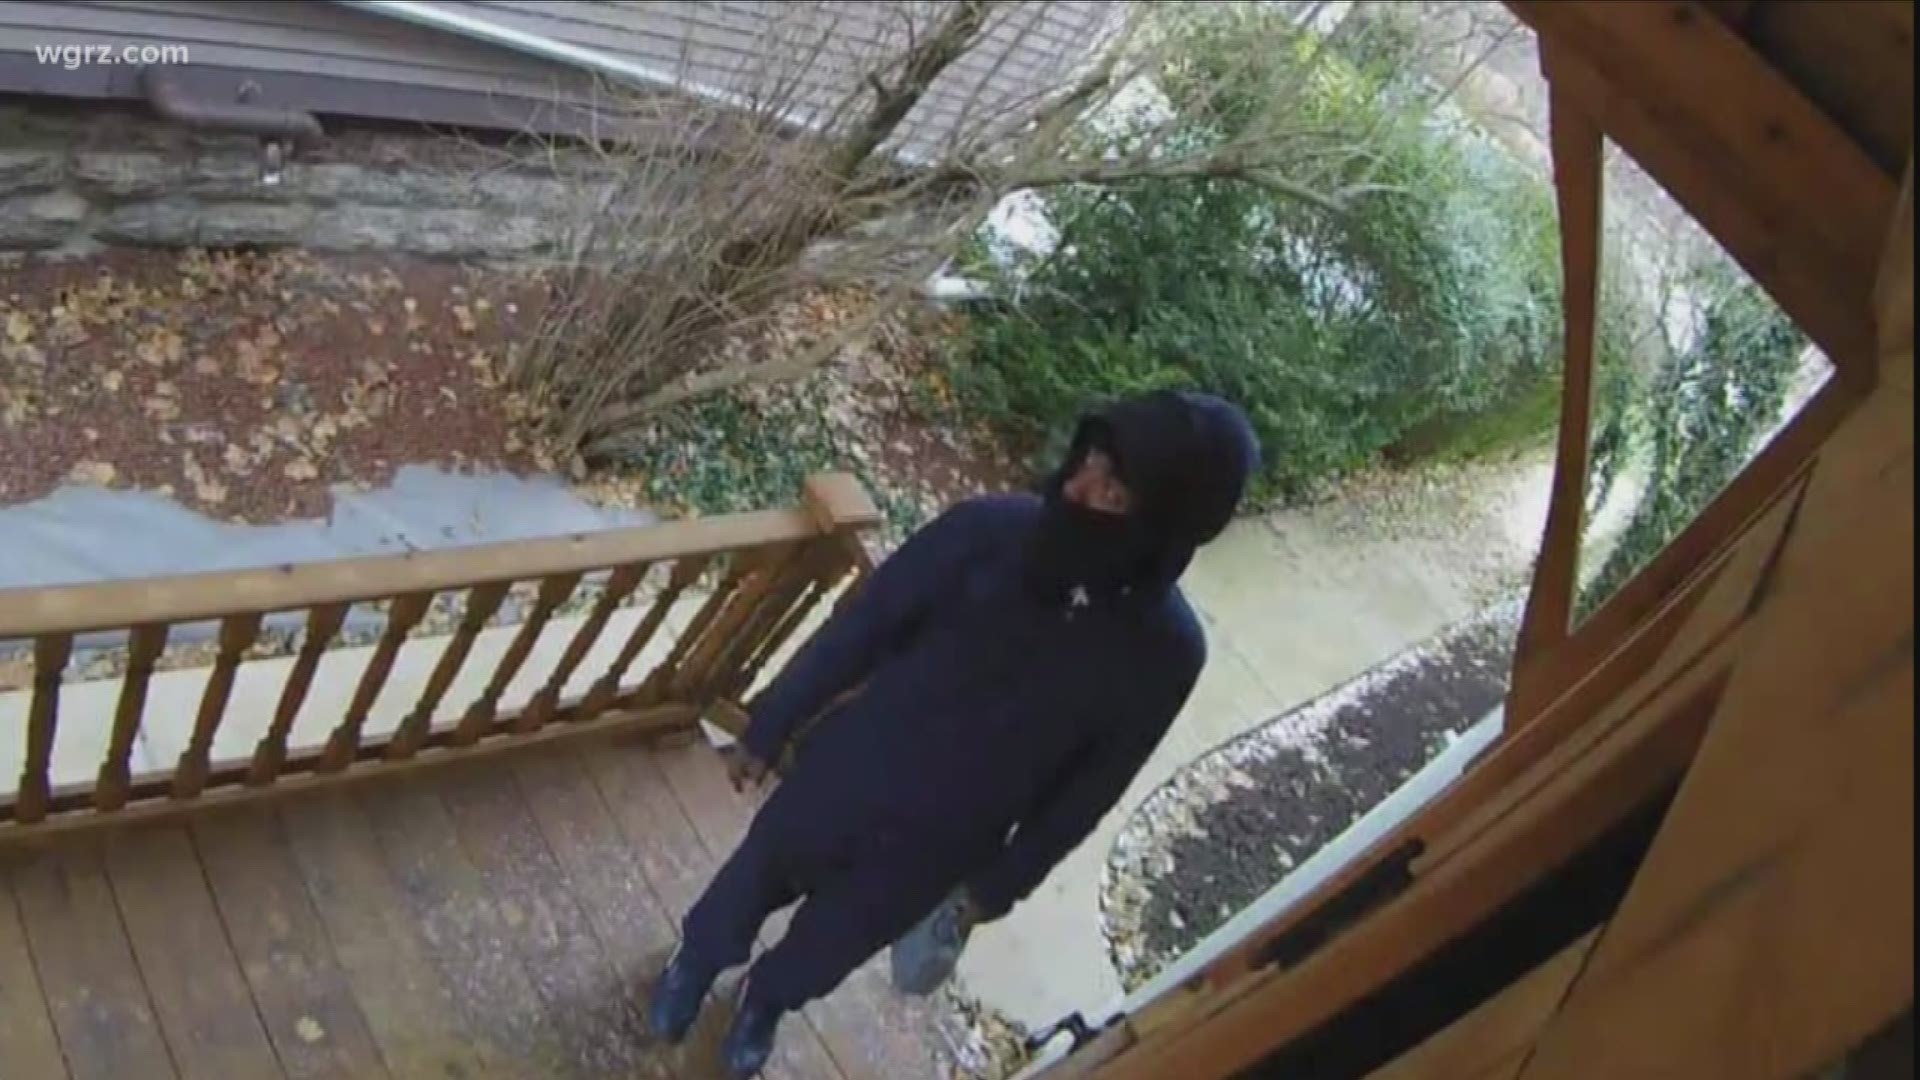 Buffalo Police are warning residents of a suspect stealing packages from homes.